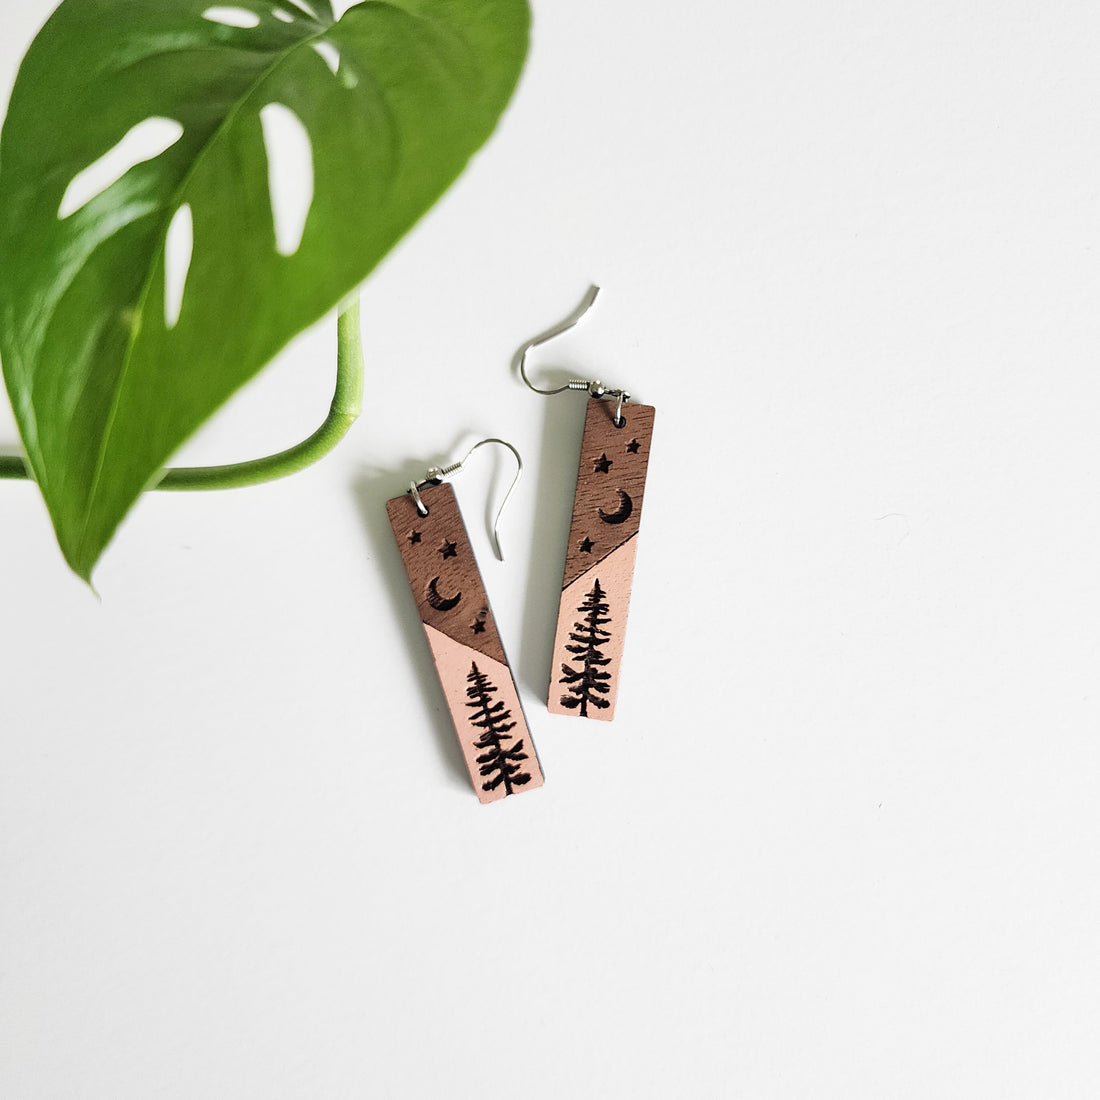 pair of starry woods earrings on a white background next to a leaf